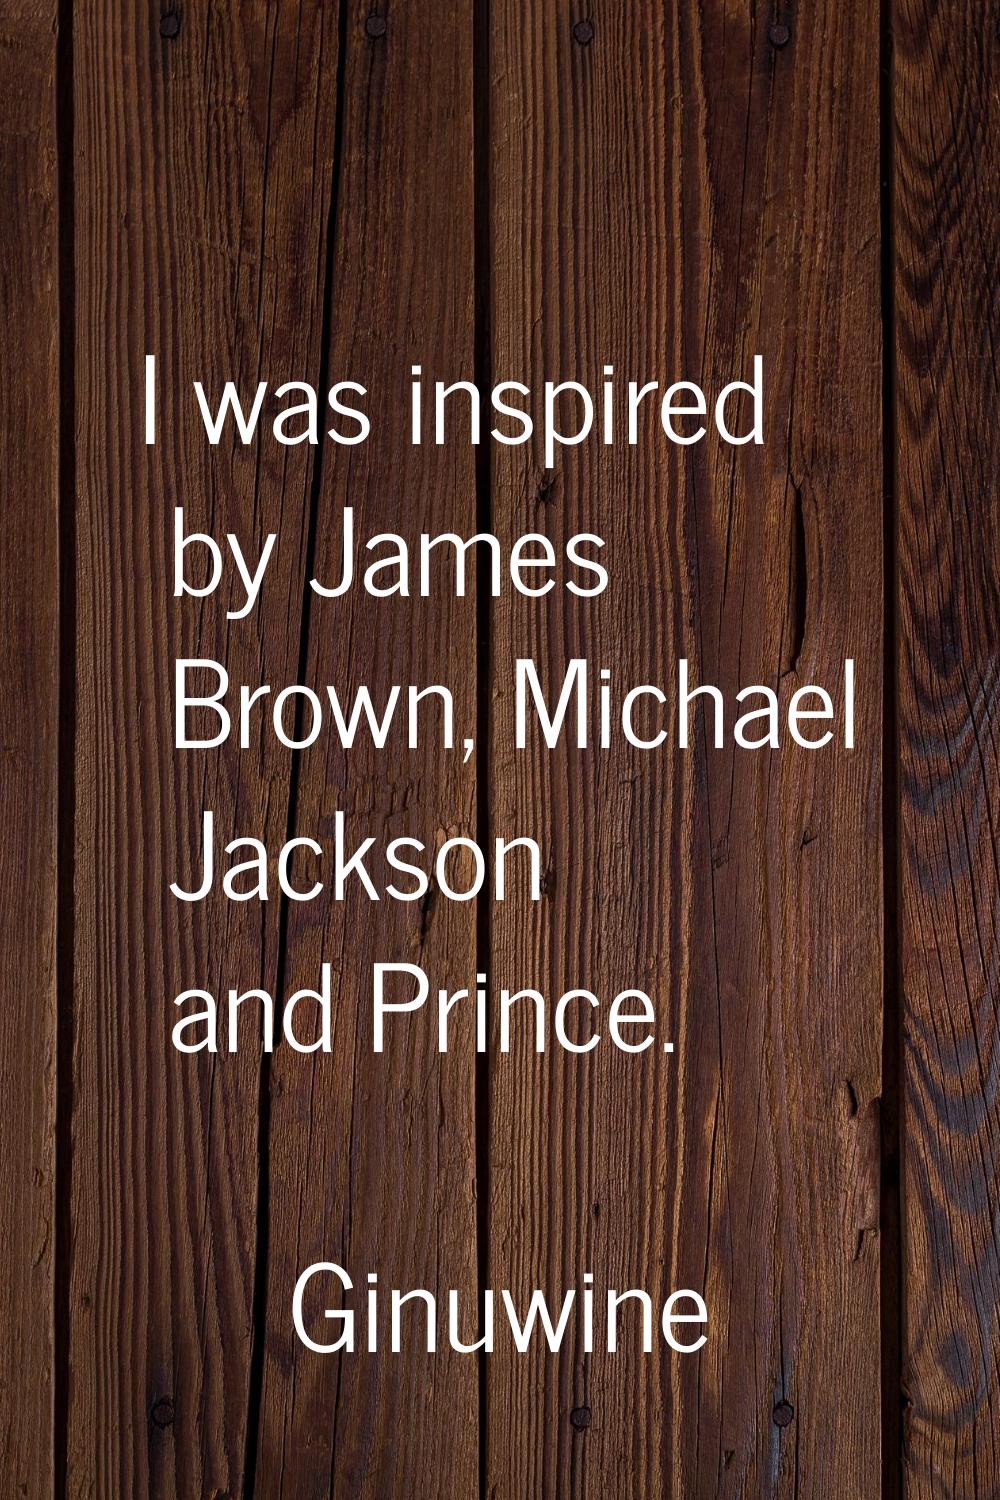 I was inspired by James Brown, Michael Jackson and Prince.